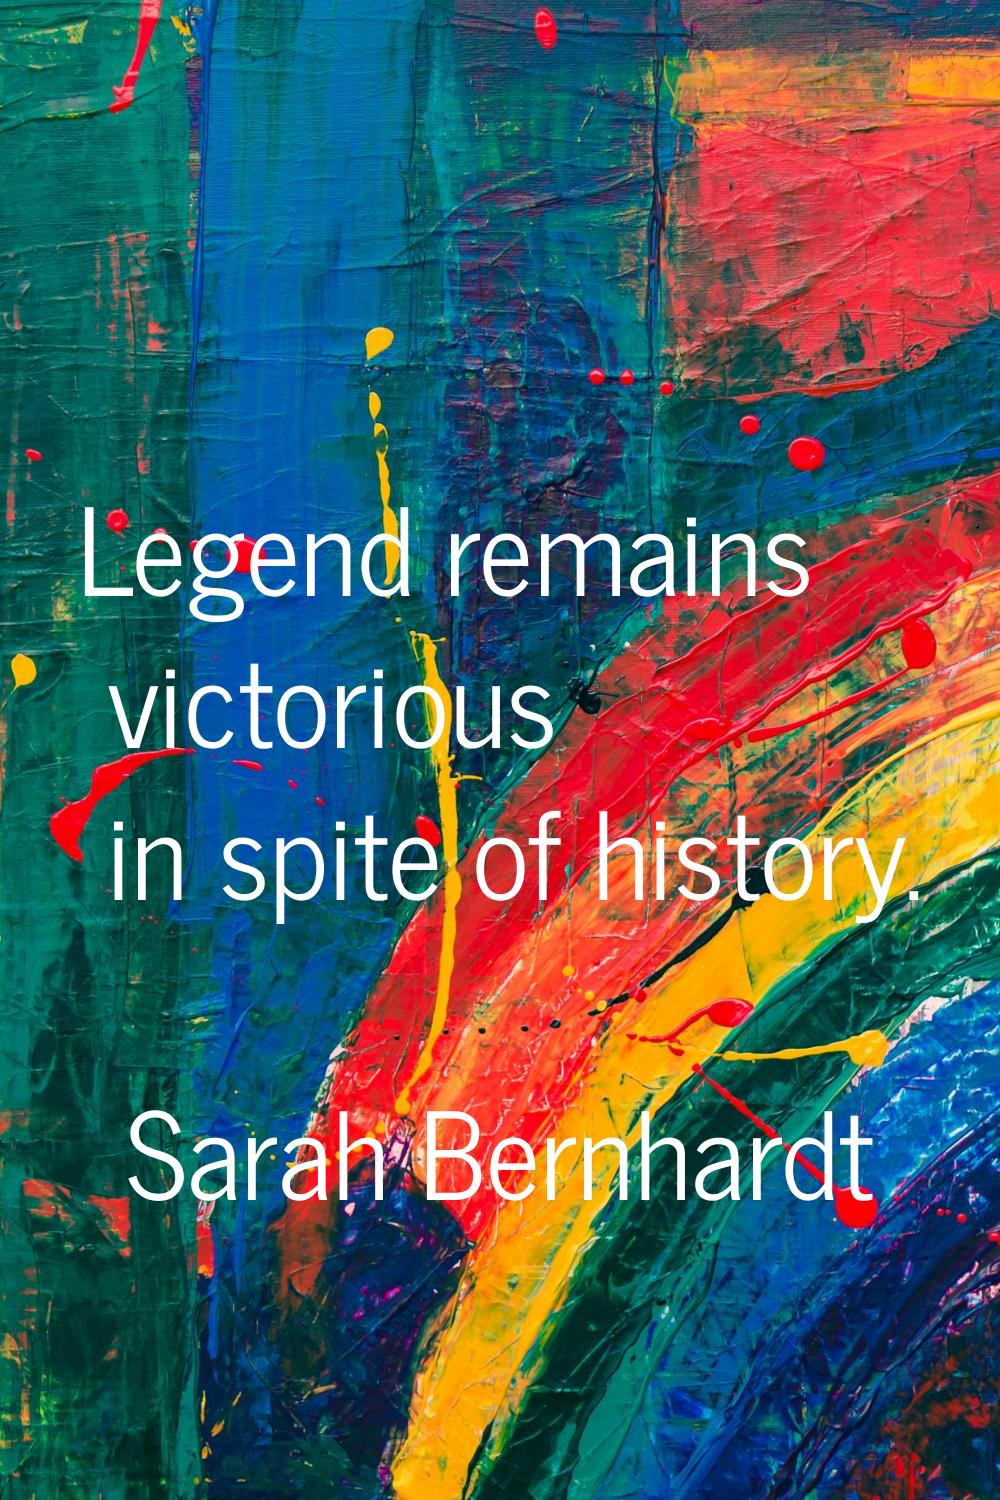 Legend remains victorious in spite of history.